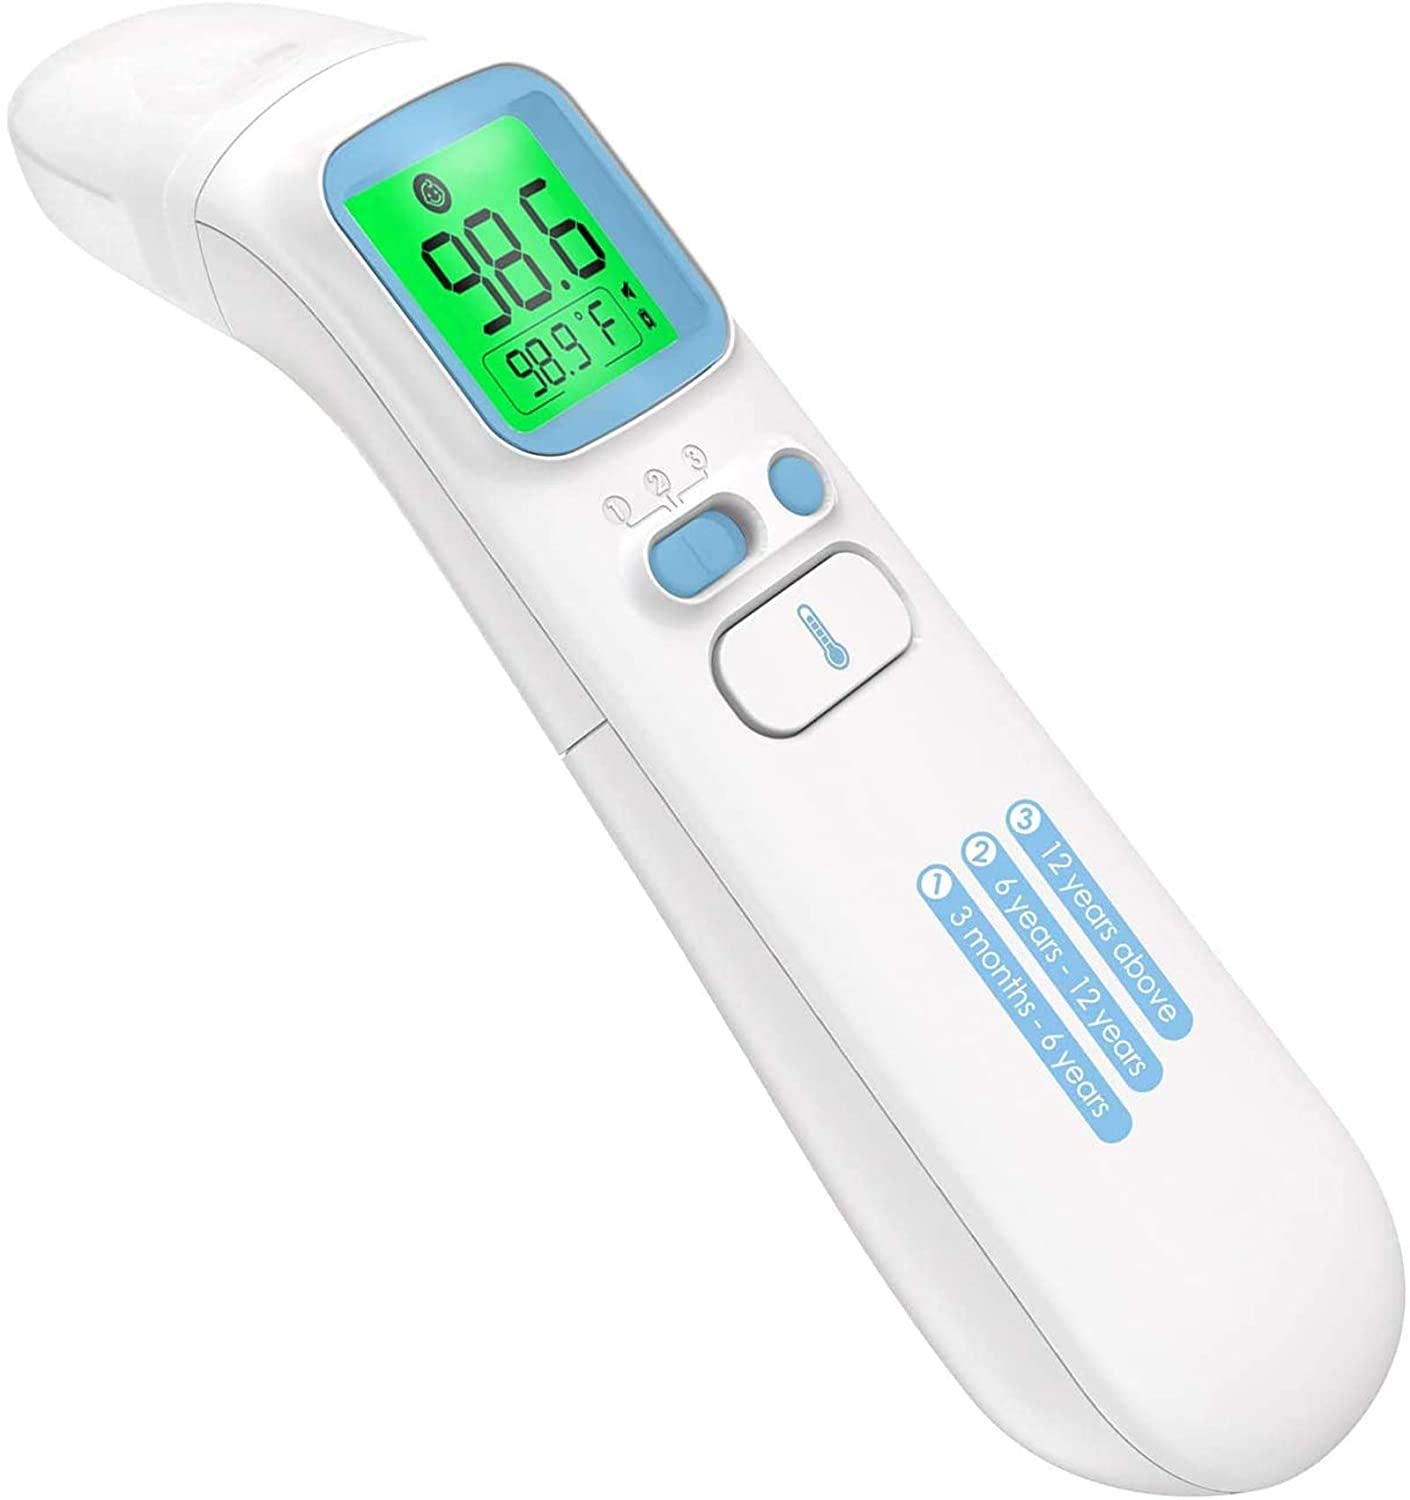 Touchless Thermometer for Adults,Forehead and Ear LCD Display Thermometer for Fever,Infrared Magnetic Thermometer for Baby Kids Surface and Room